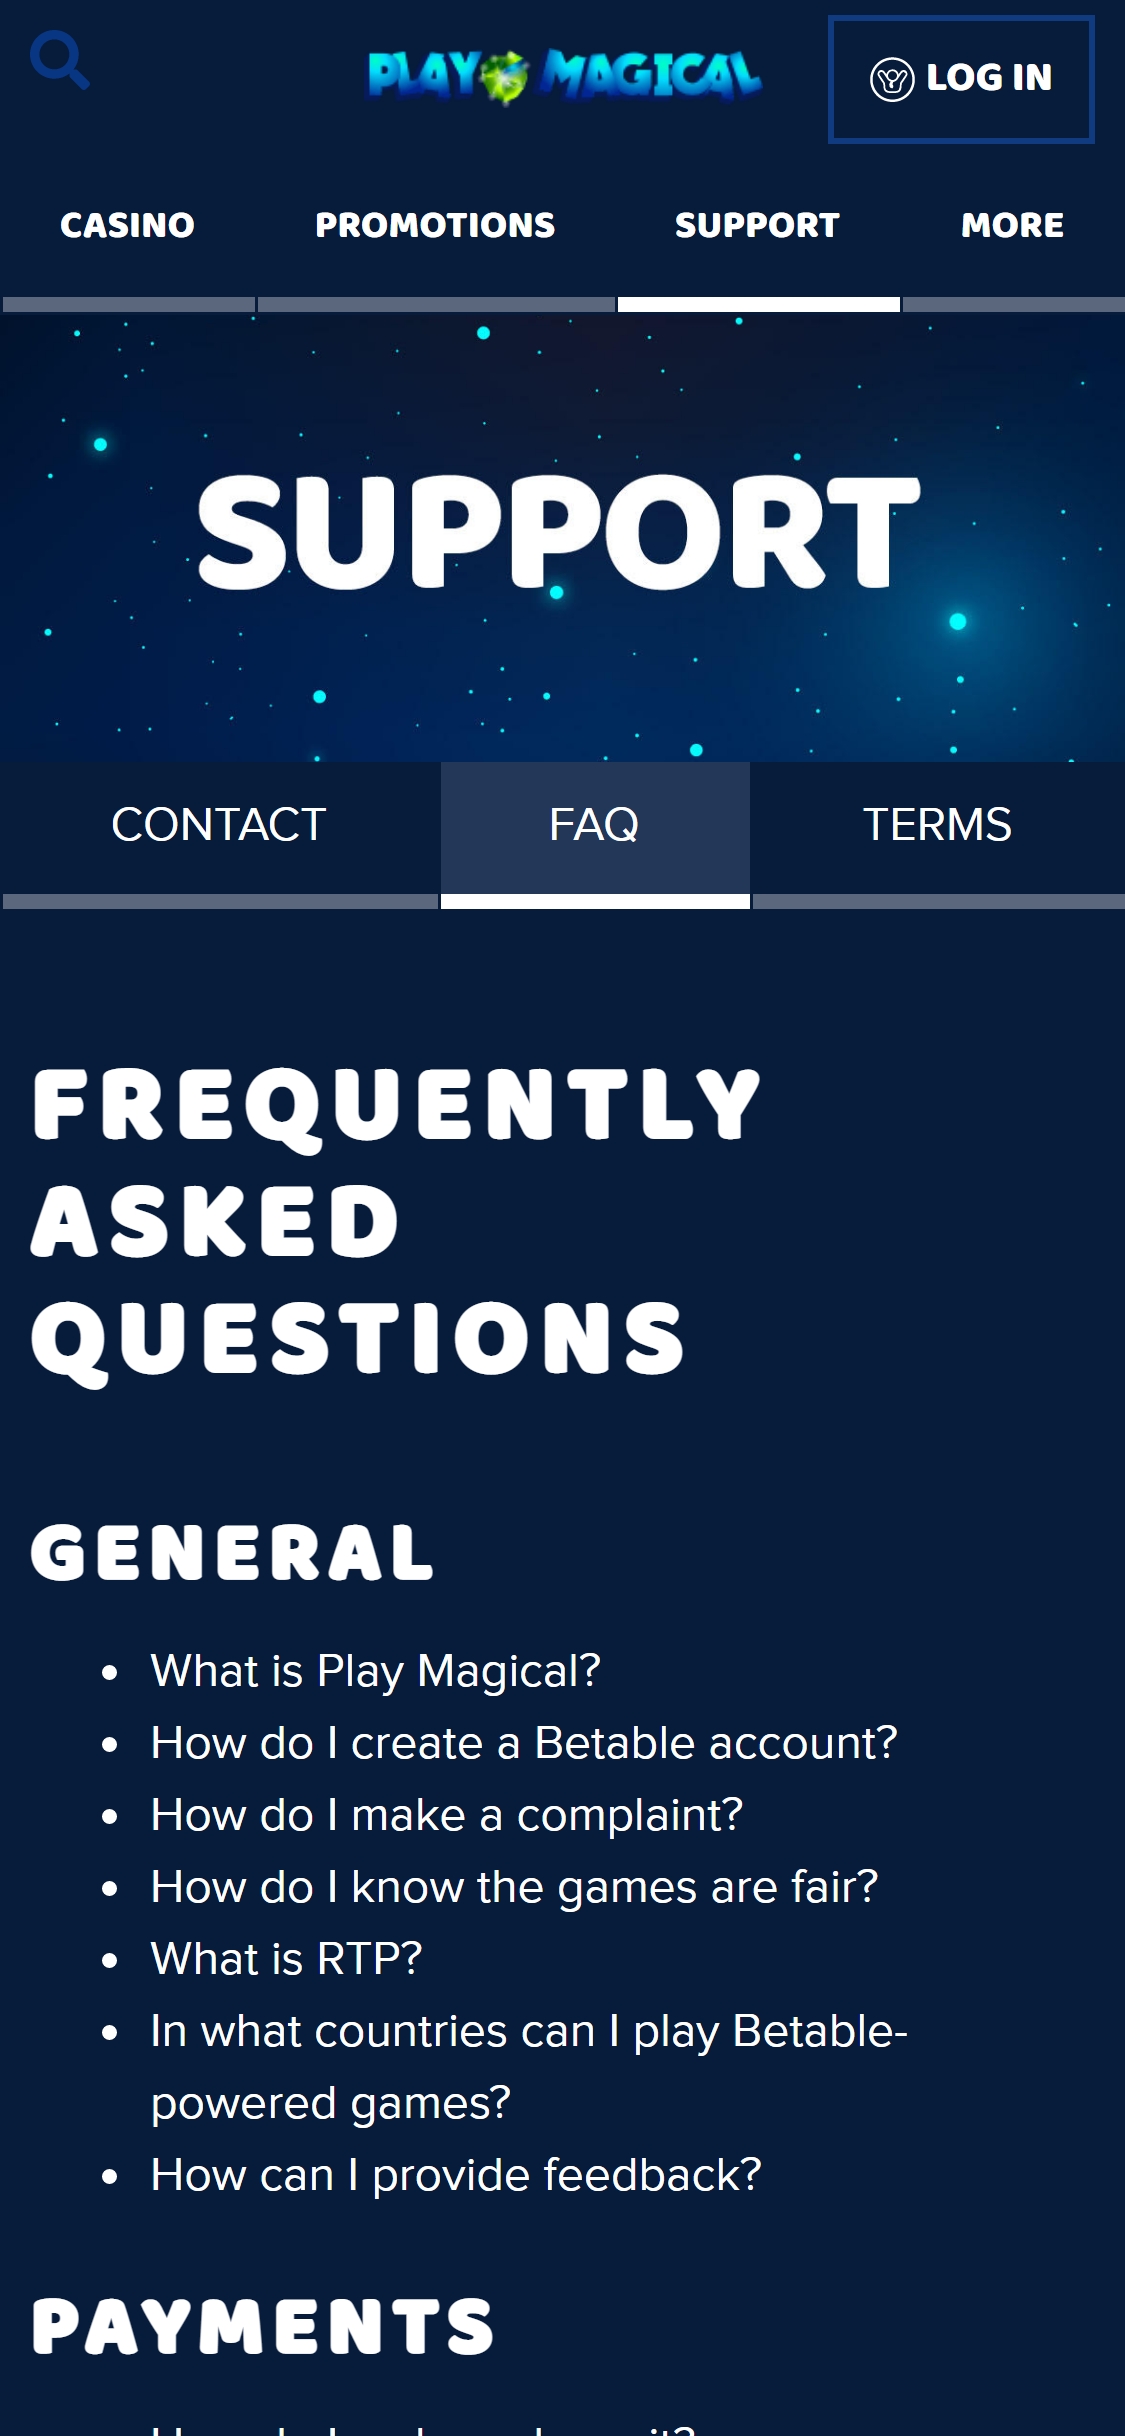 Play Magical Casino Mobile Support Review